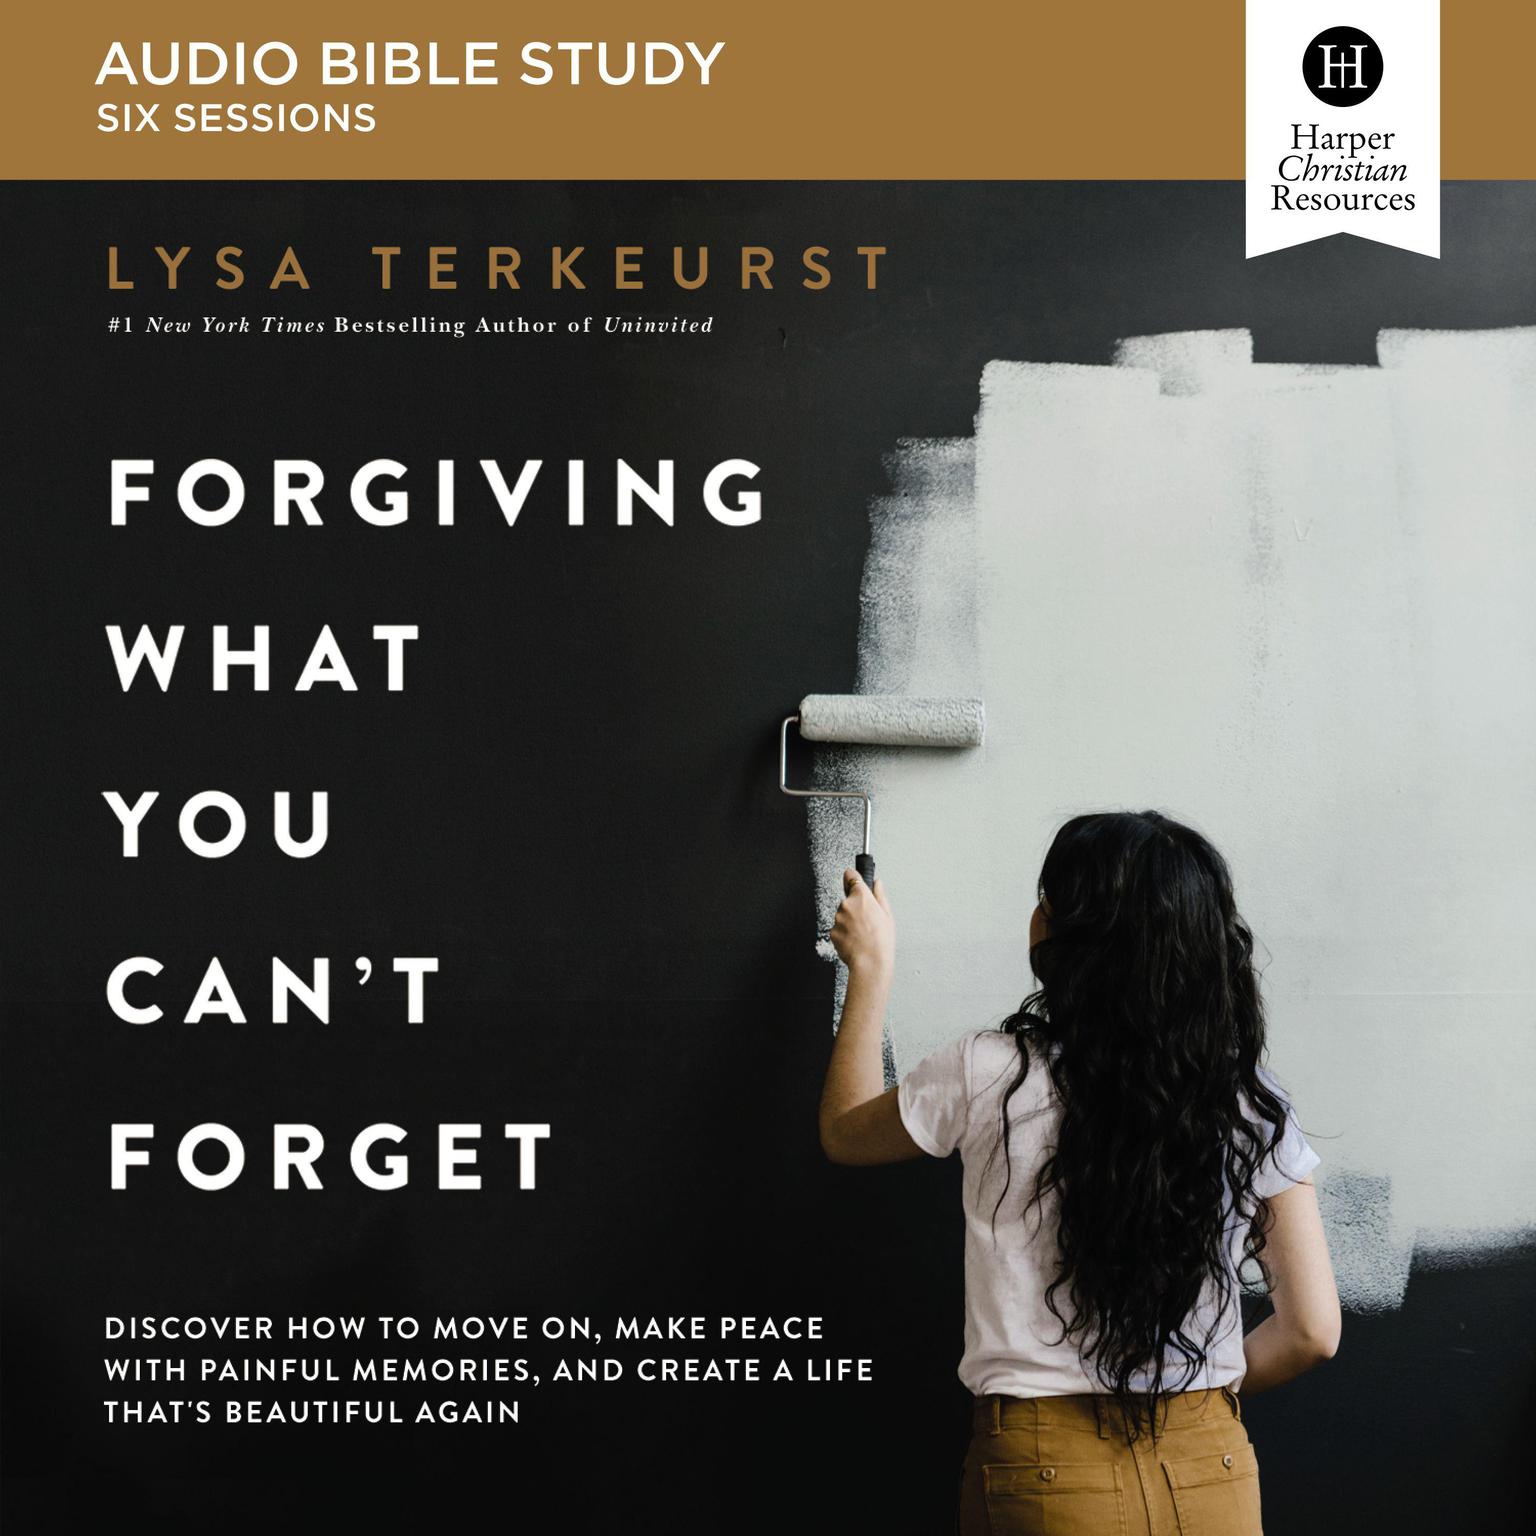 Forgiving What You Cant Forget: Audio Bible Studies: How to Move On, Make Peace with Painful Memories, and Create a Life Thats Beautiful Again Audiobook, by Lysa TerKeurst